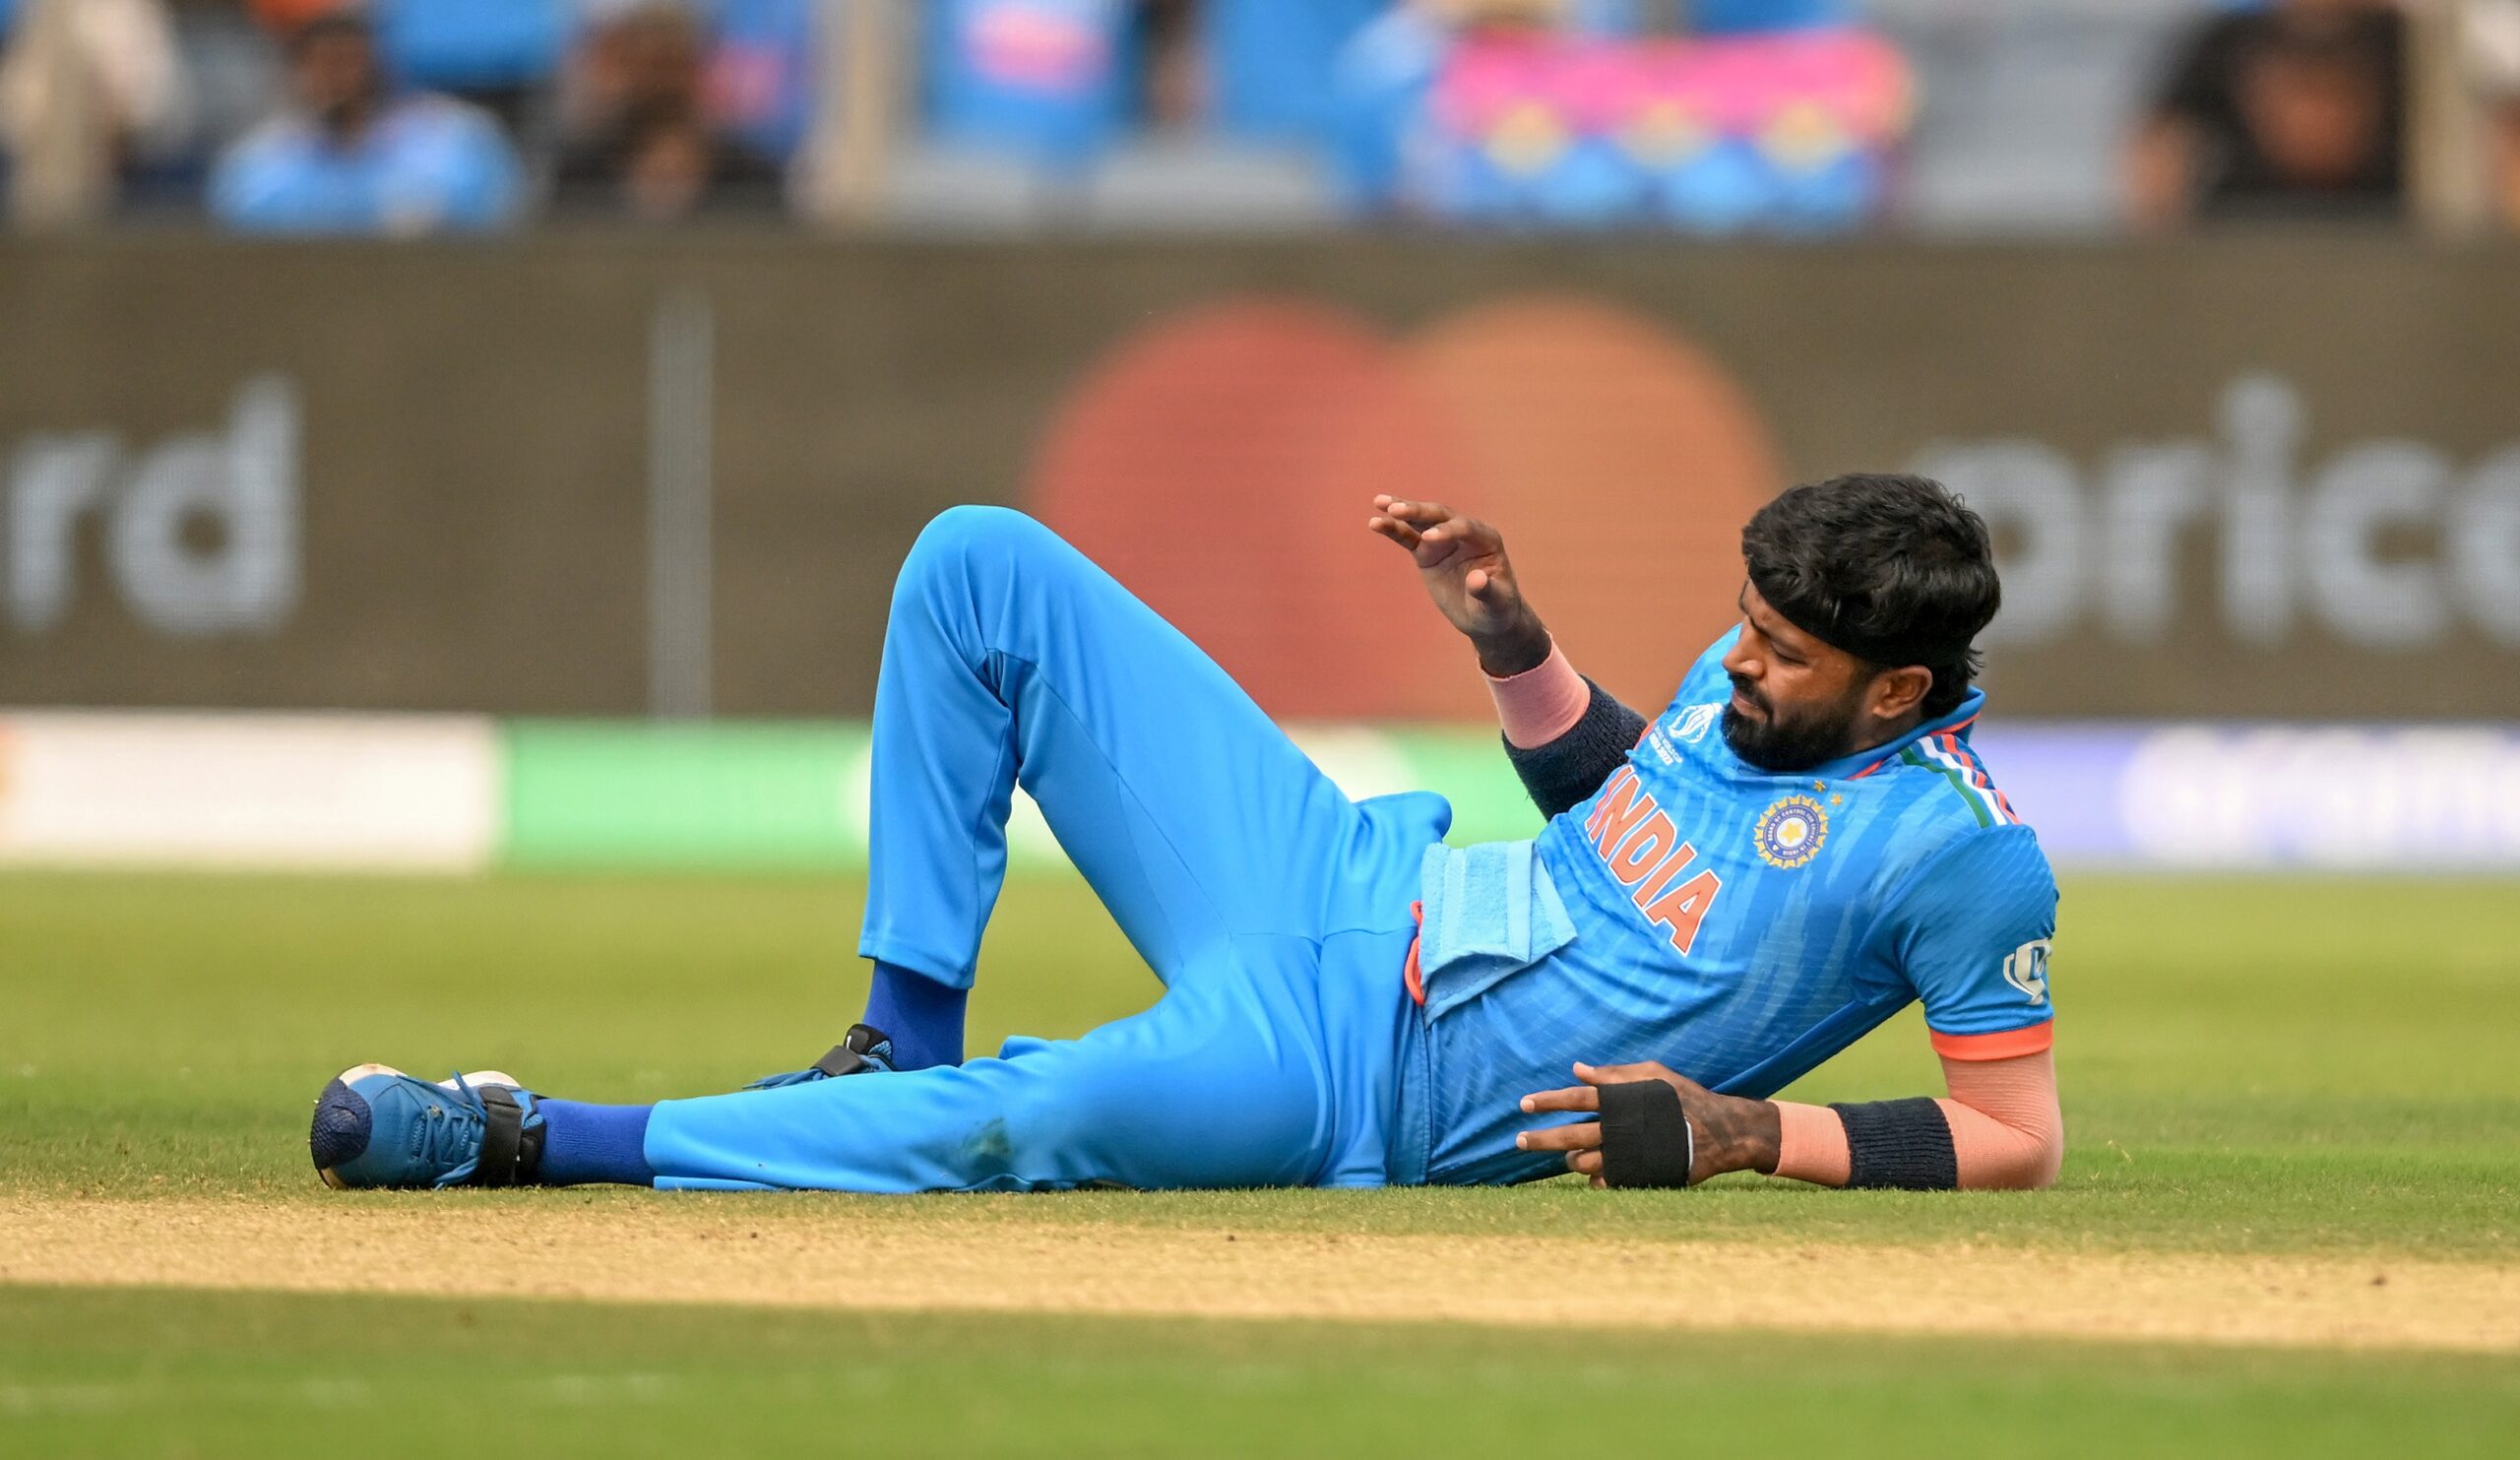 “Told Team I’ll Be Back In 5 Days But…”: Hardik Pandya’s Stunning World Cup Injury Tale